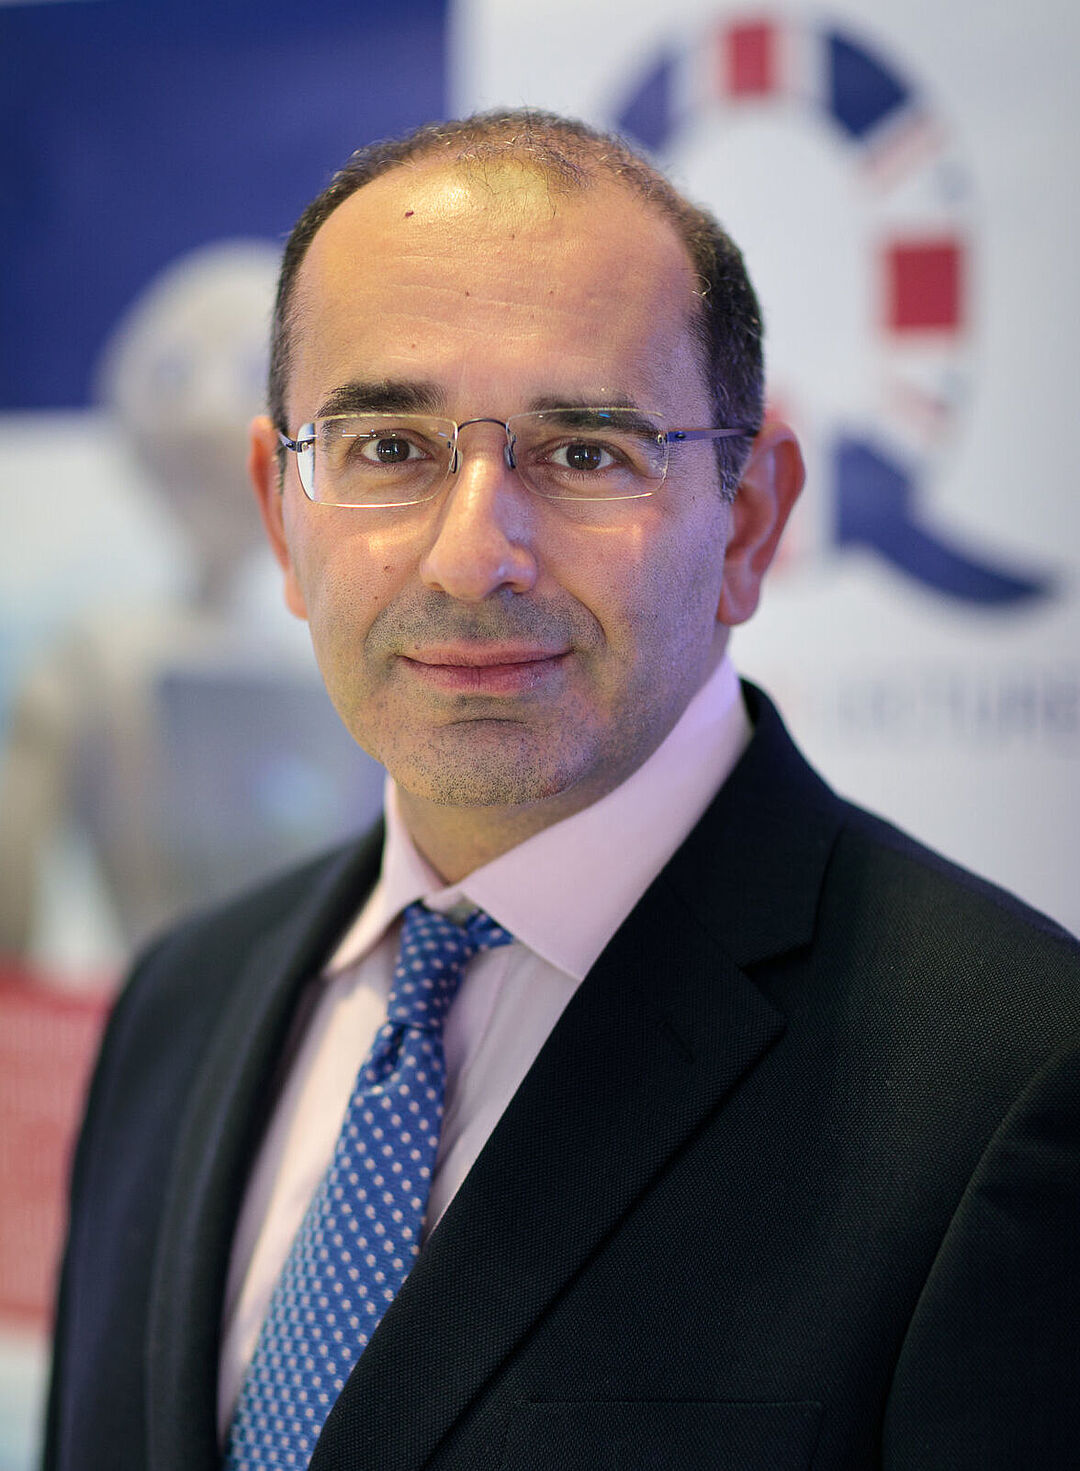 Zoubin Ghahramani FRS, Professor of Information Engineering at the University of Cambridge and Chief Scientist at Uber